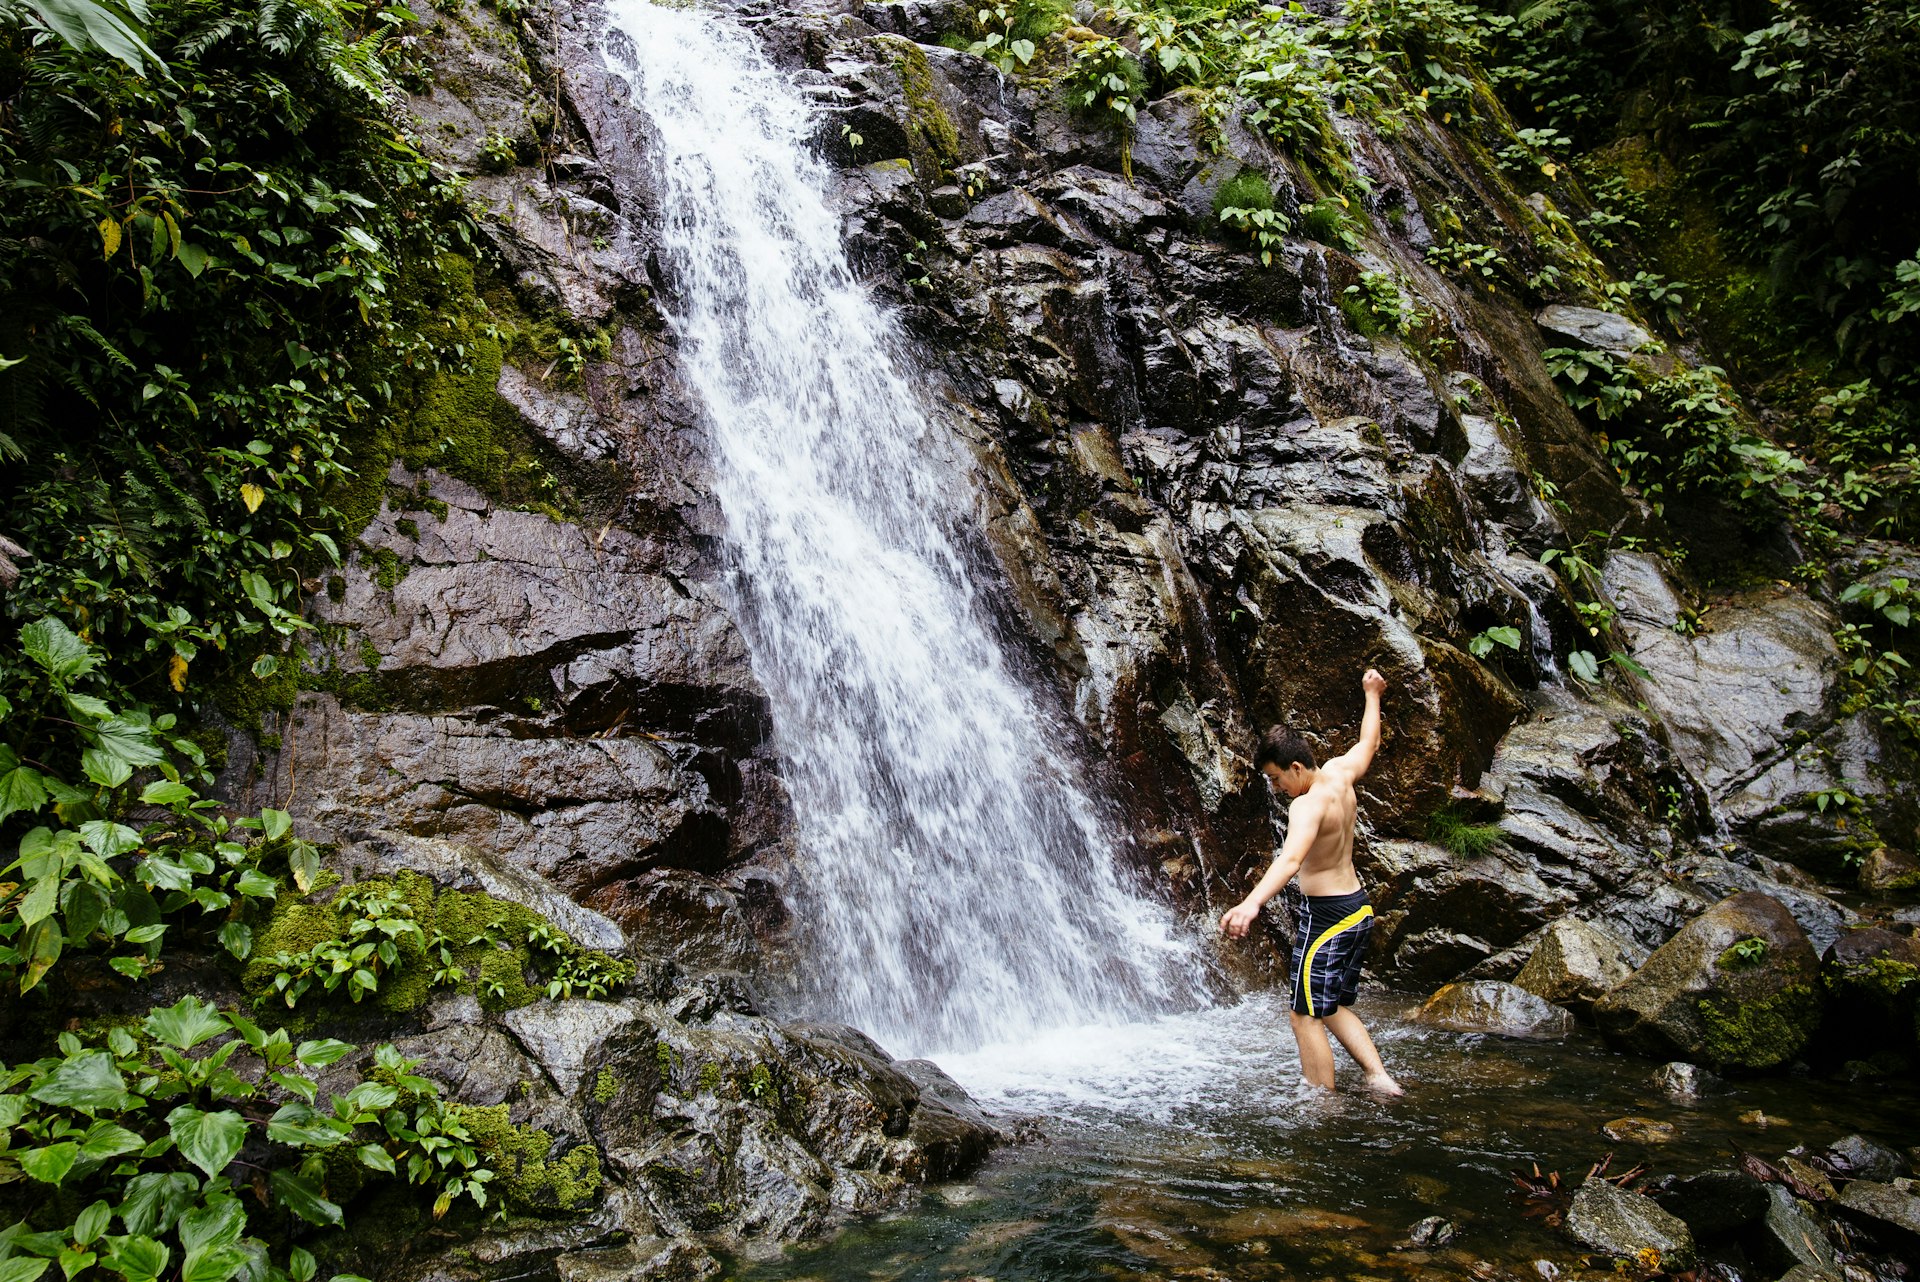 A young boy cools off under a waterfall